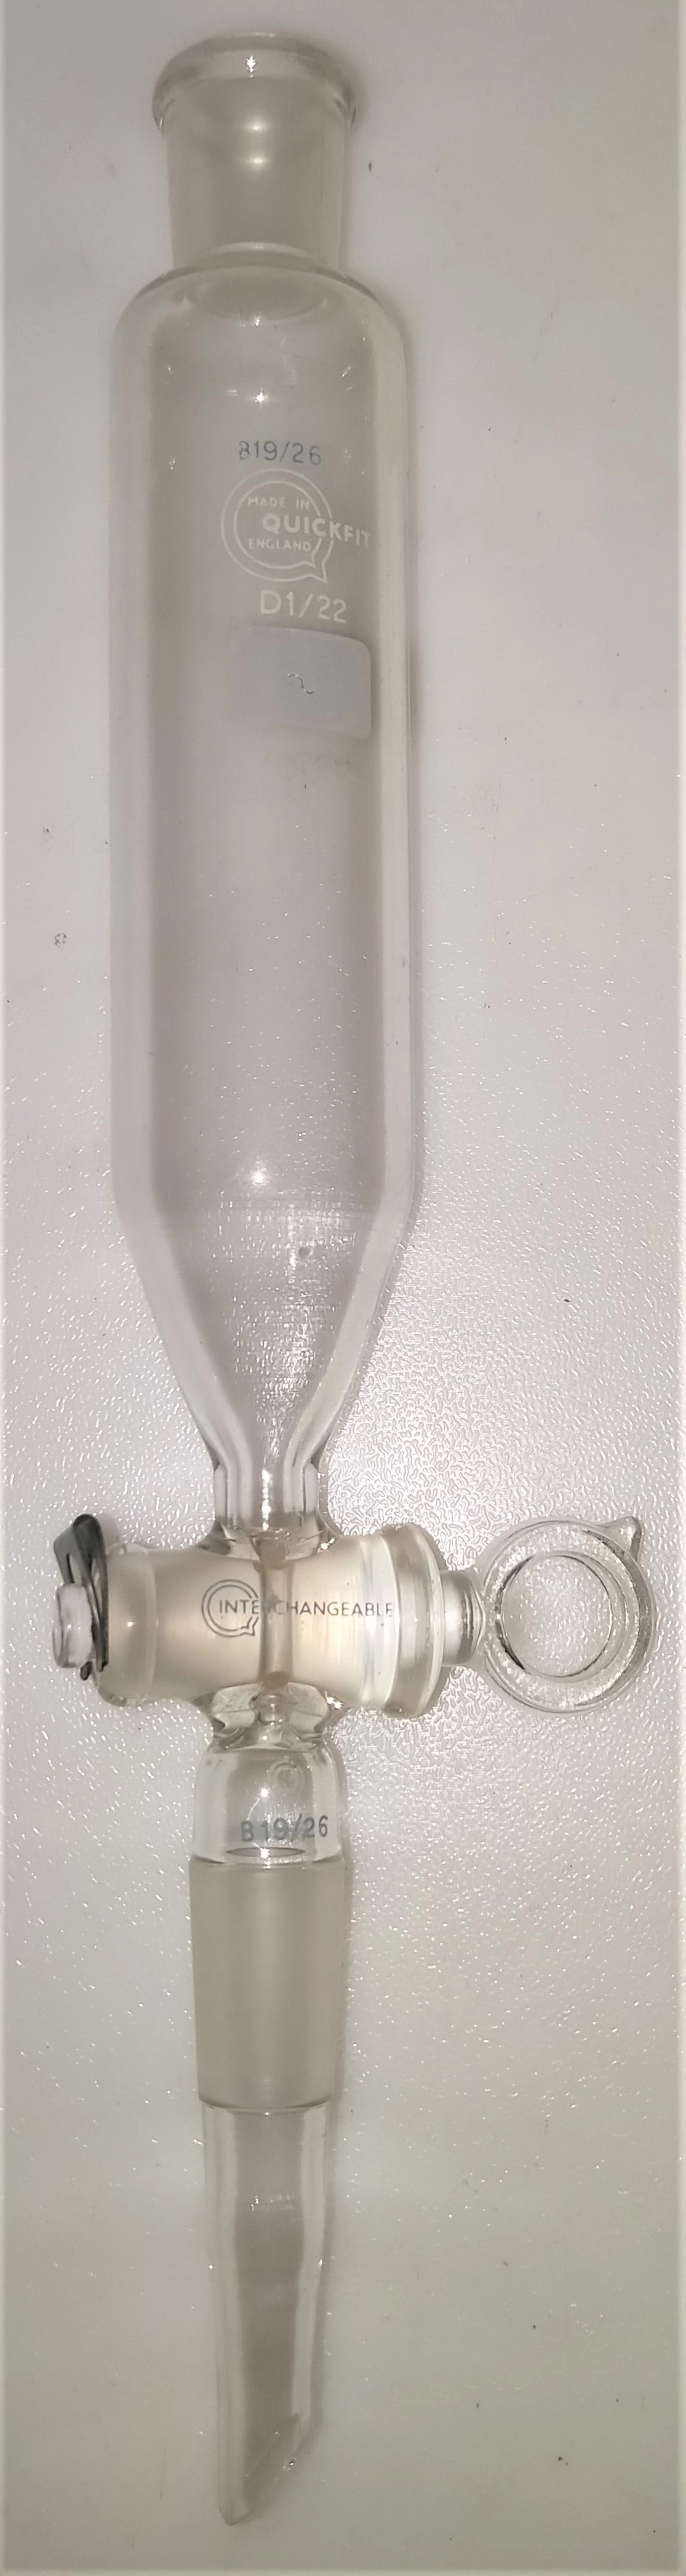 QuickFit D1/22 Dropping Funnel with Glass Stopcock - 100mL